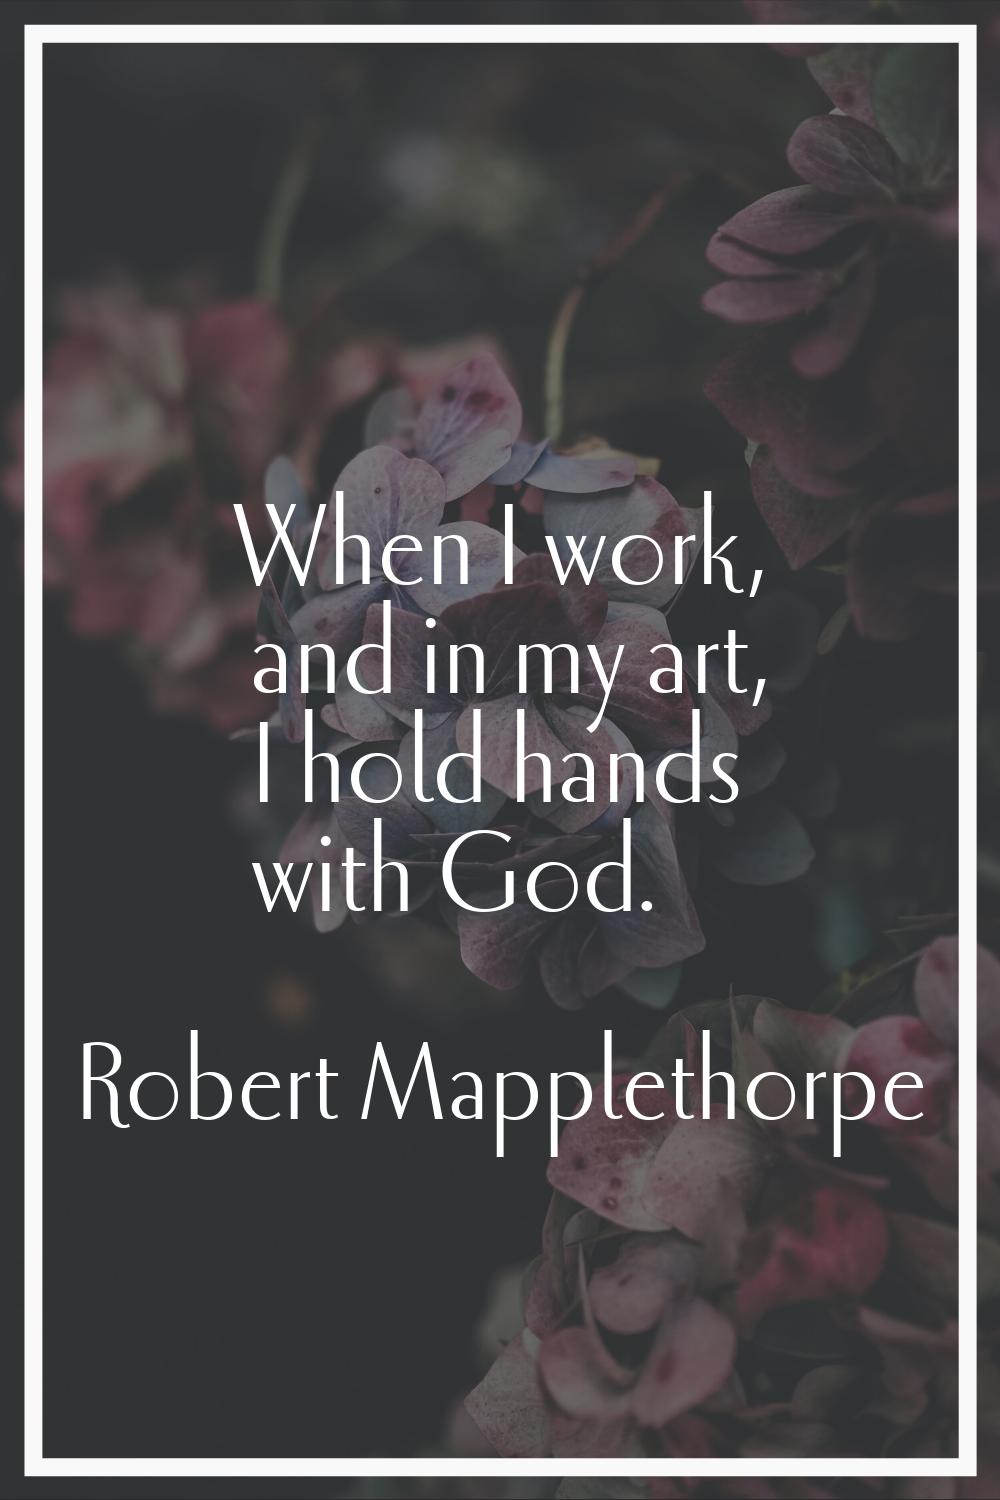 When I work, and in my art, I hold hands with God.